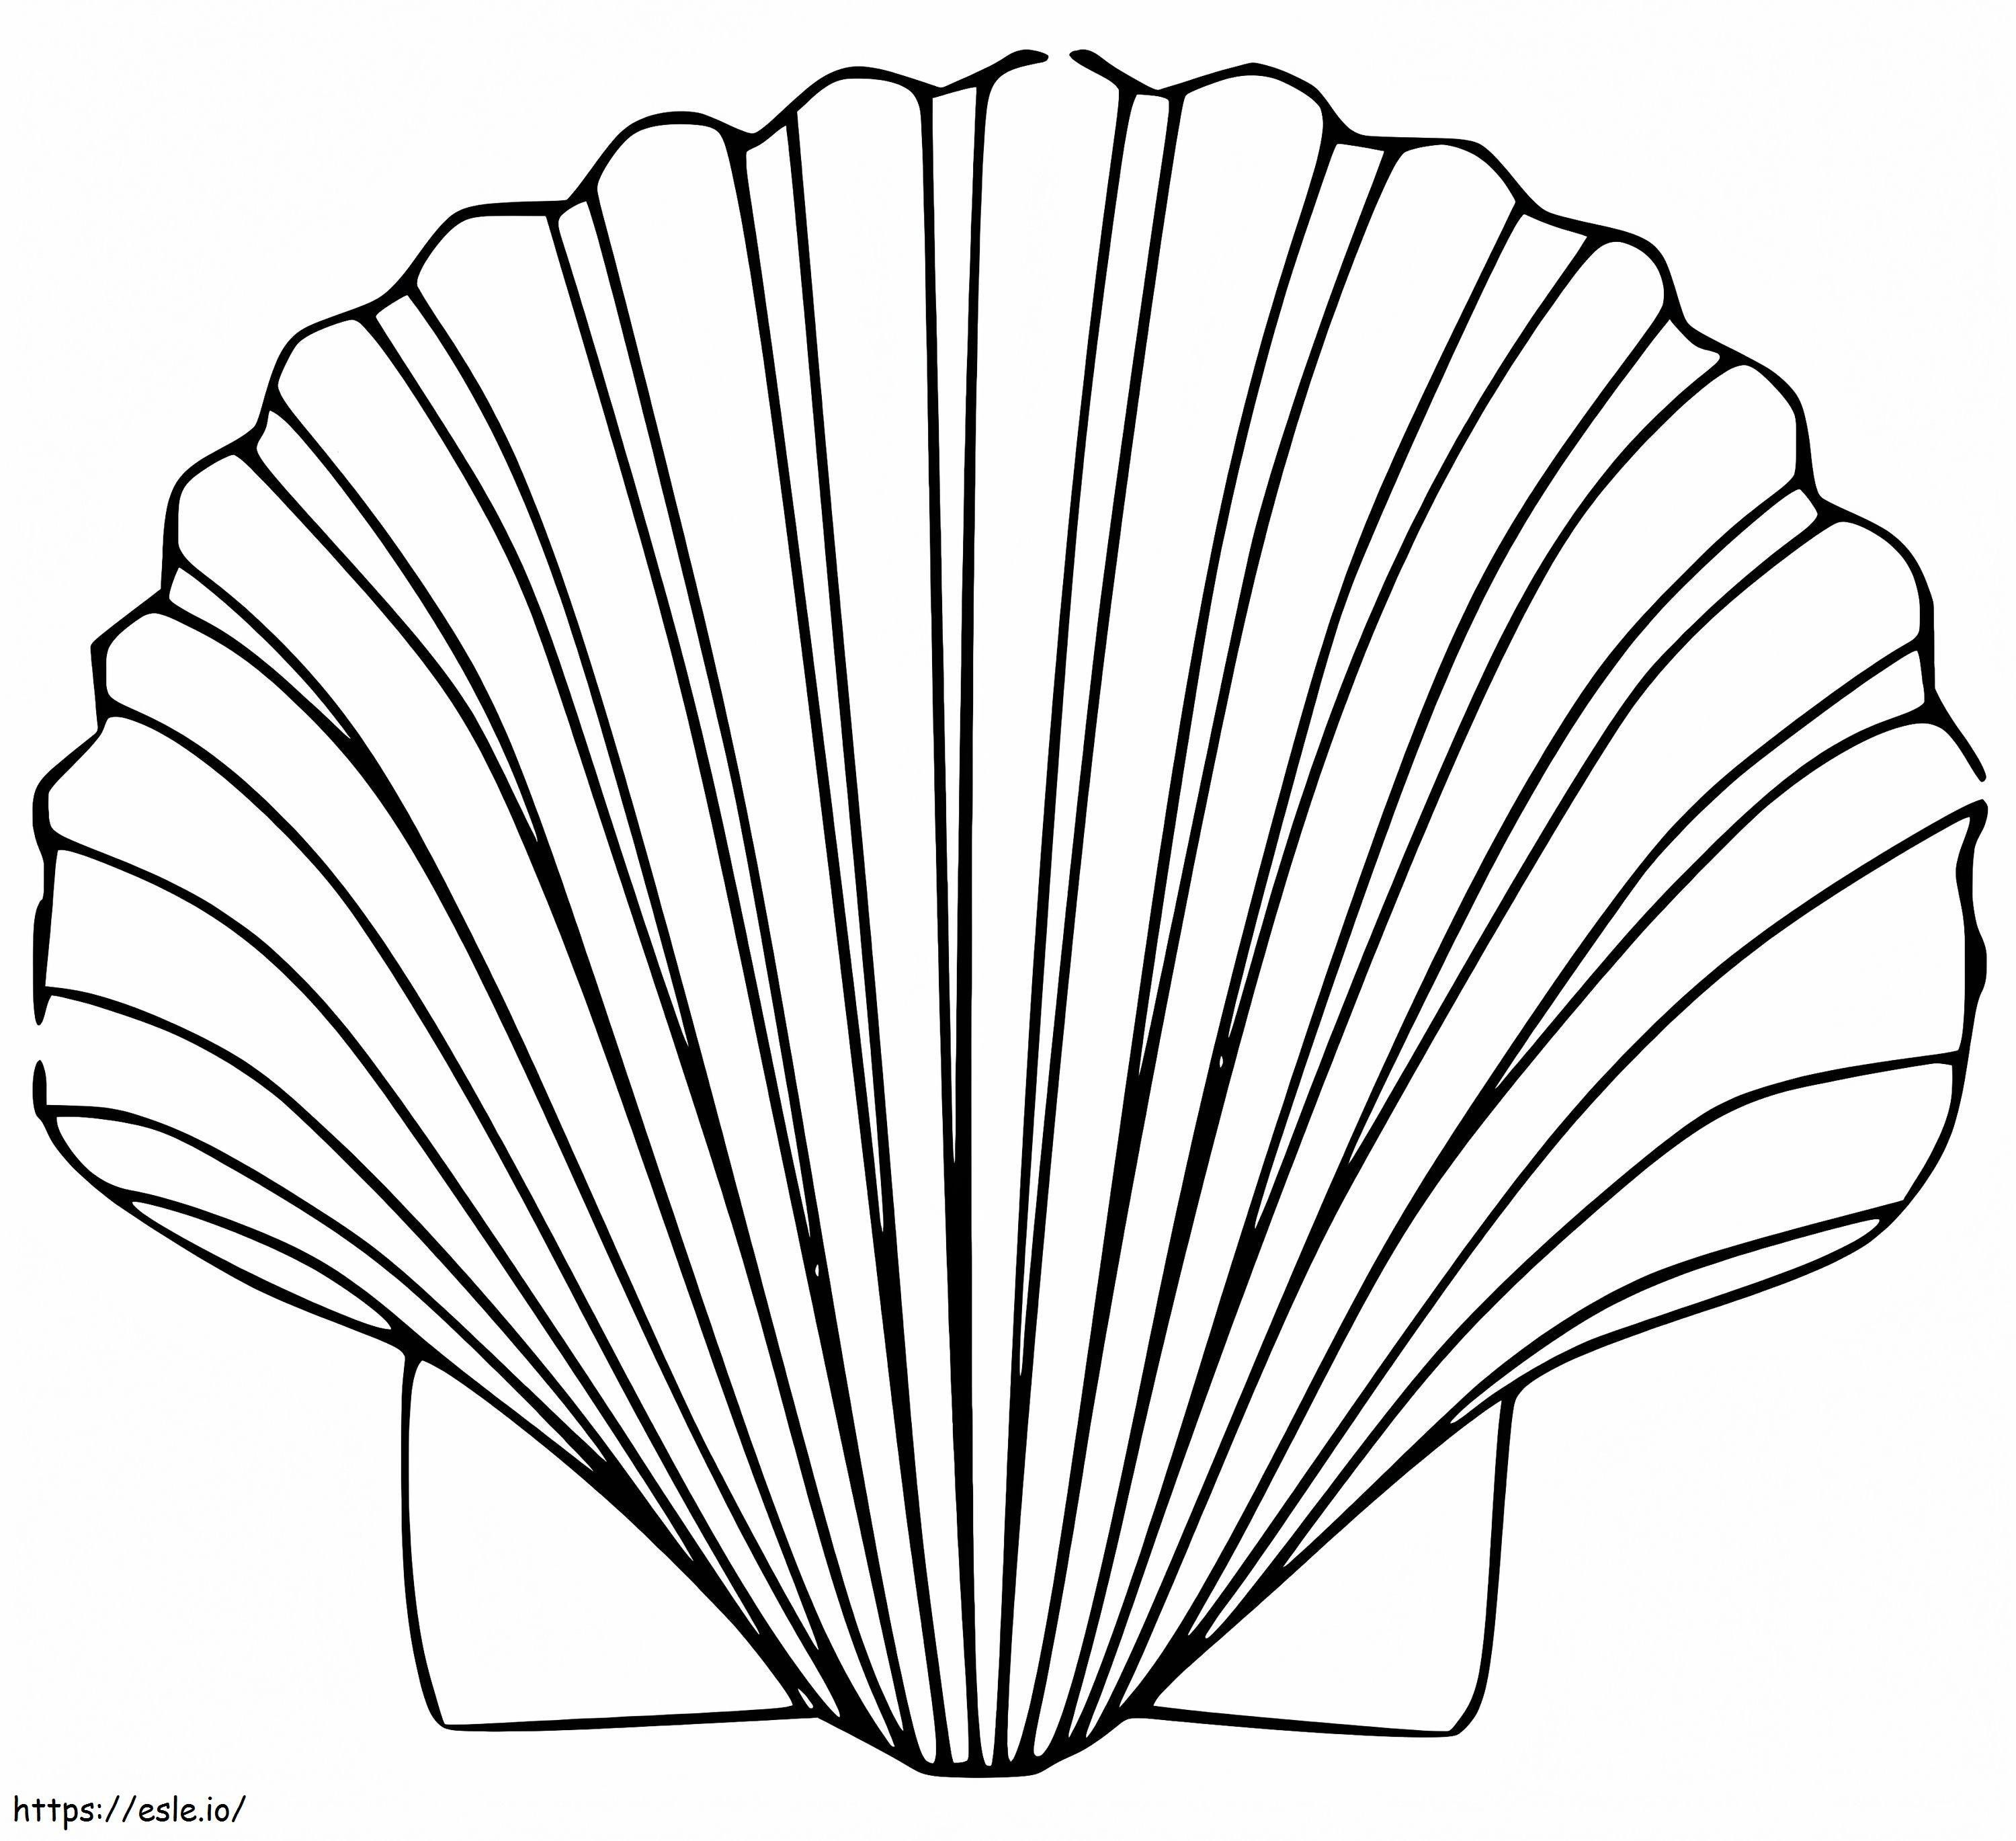 Scallop 3 coloring page